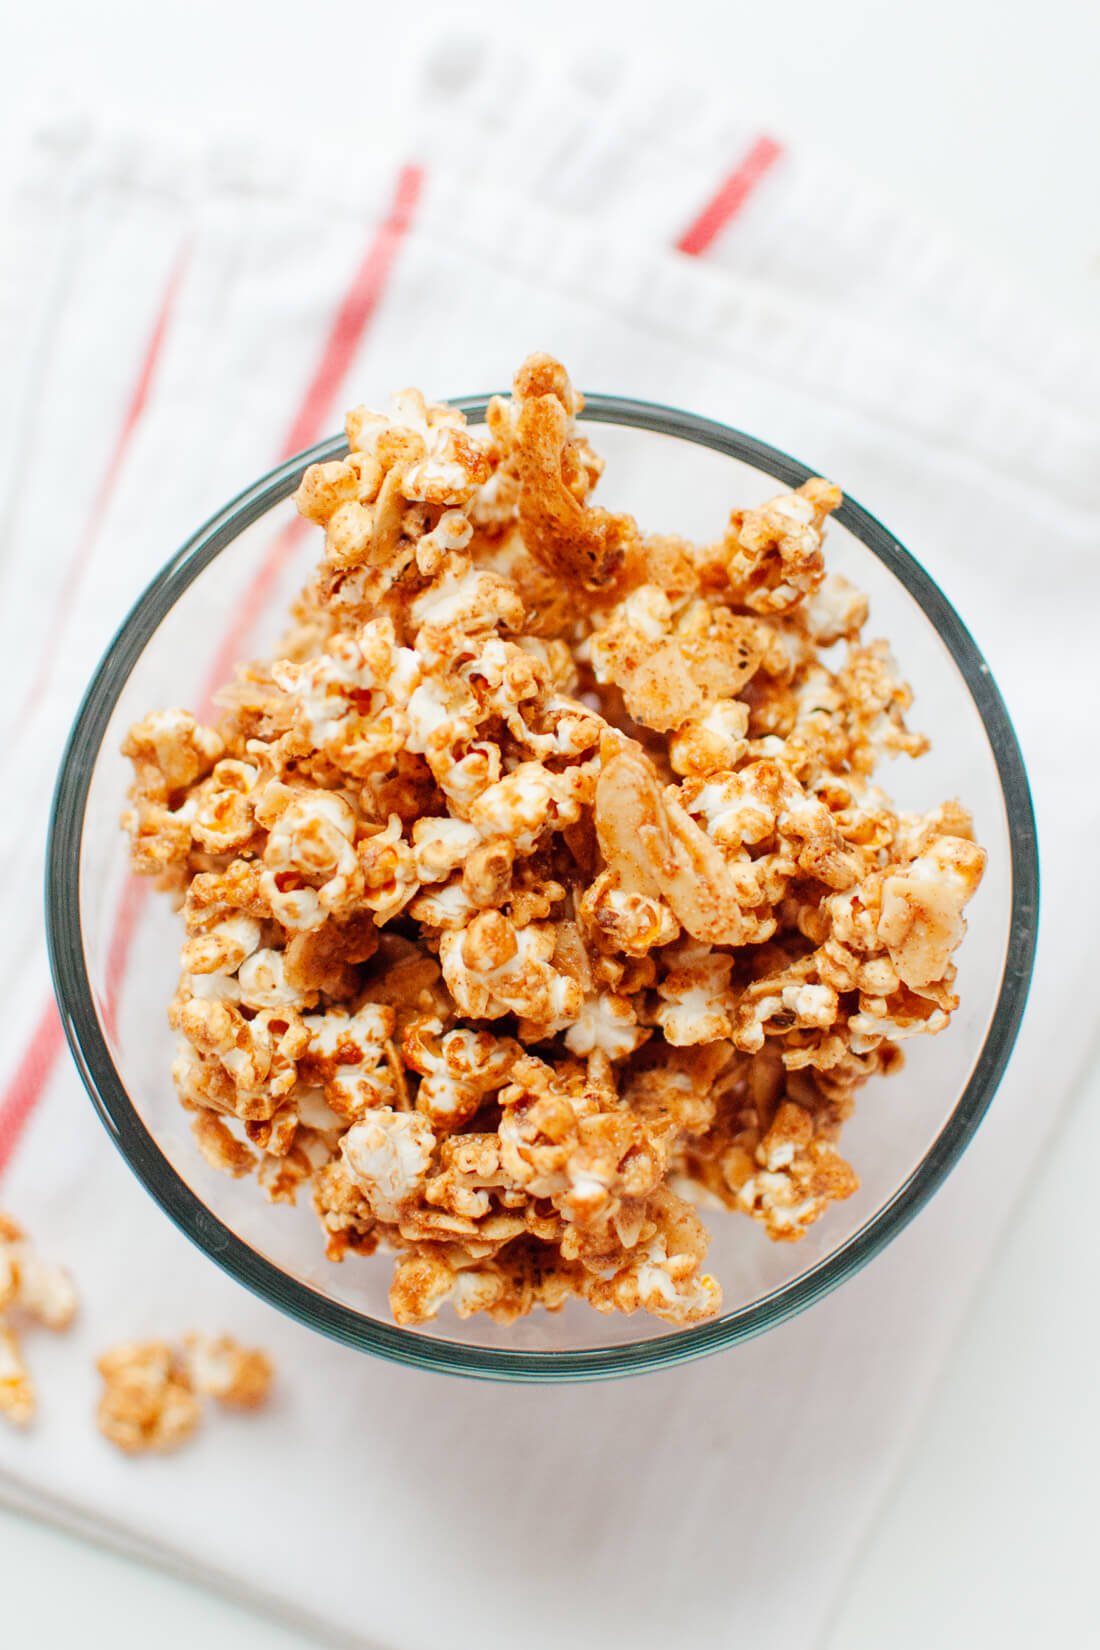 Vegan caramel popcorn made with maple syrup and almond butter!